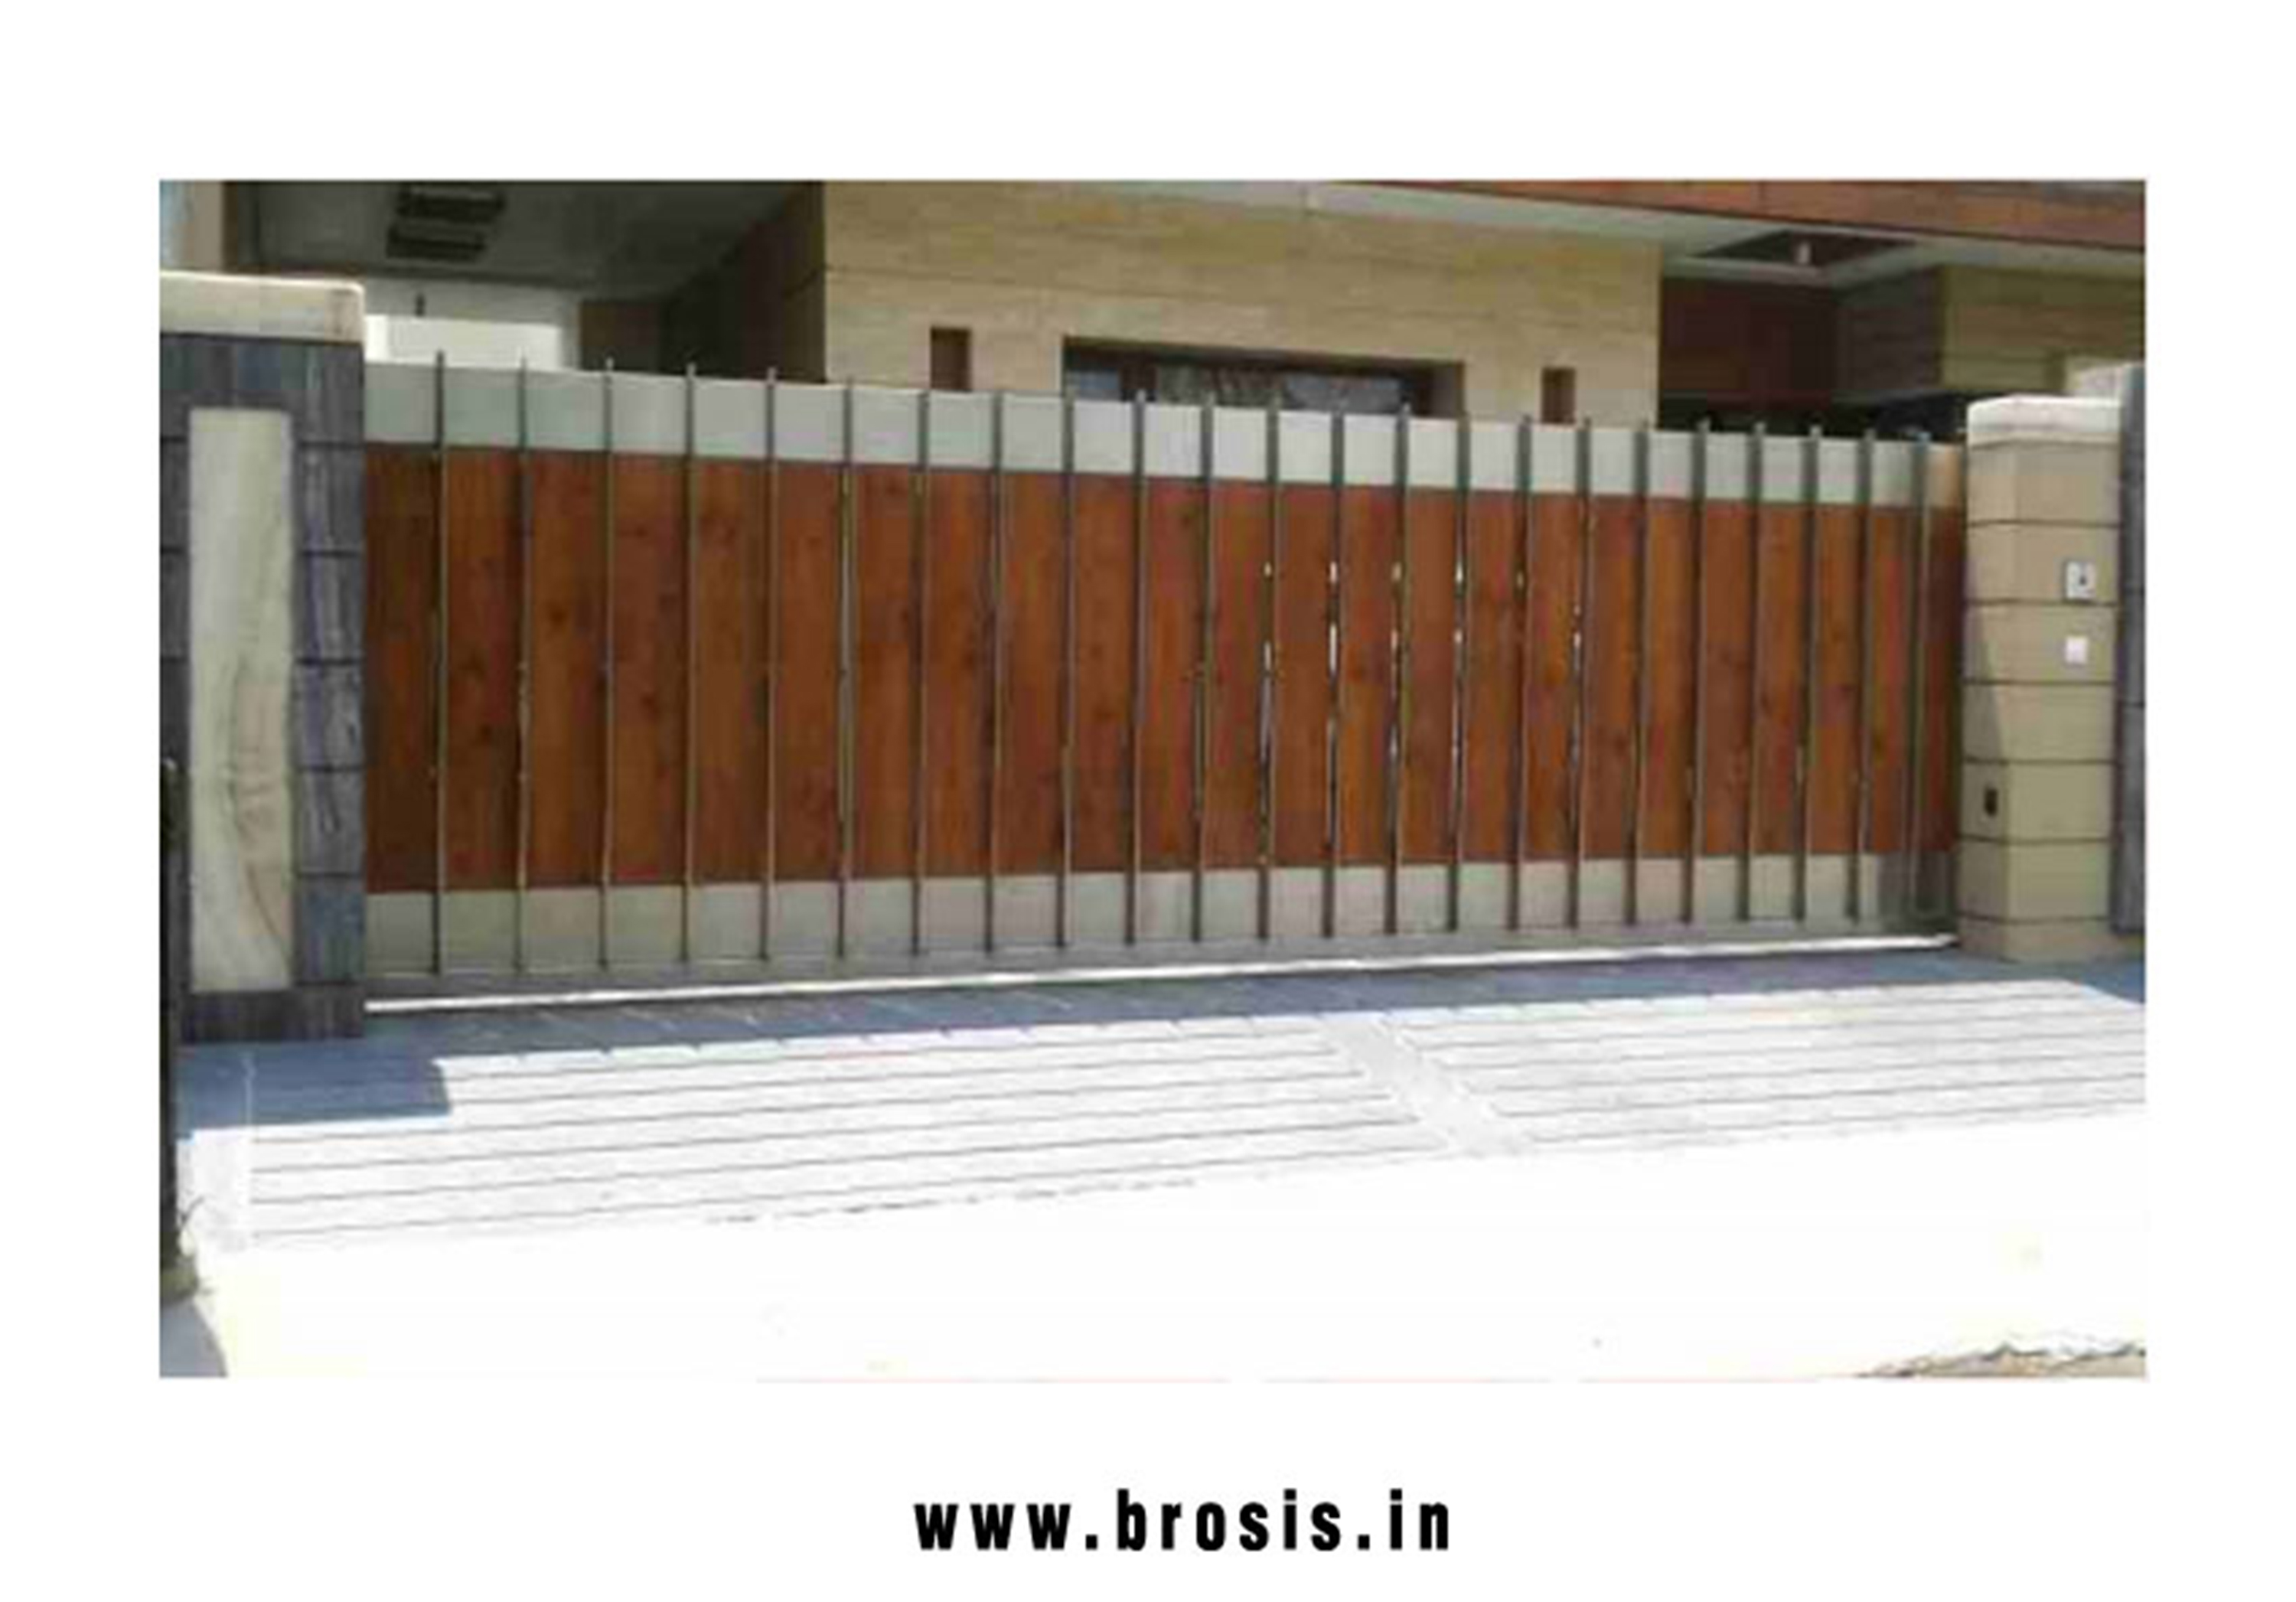 Automatic Sliding Gate manufacturers exporters in India Punjab Ludhiana